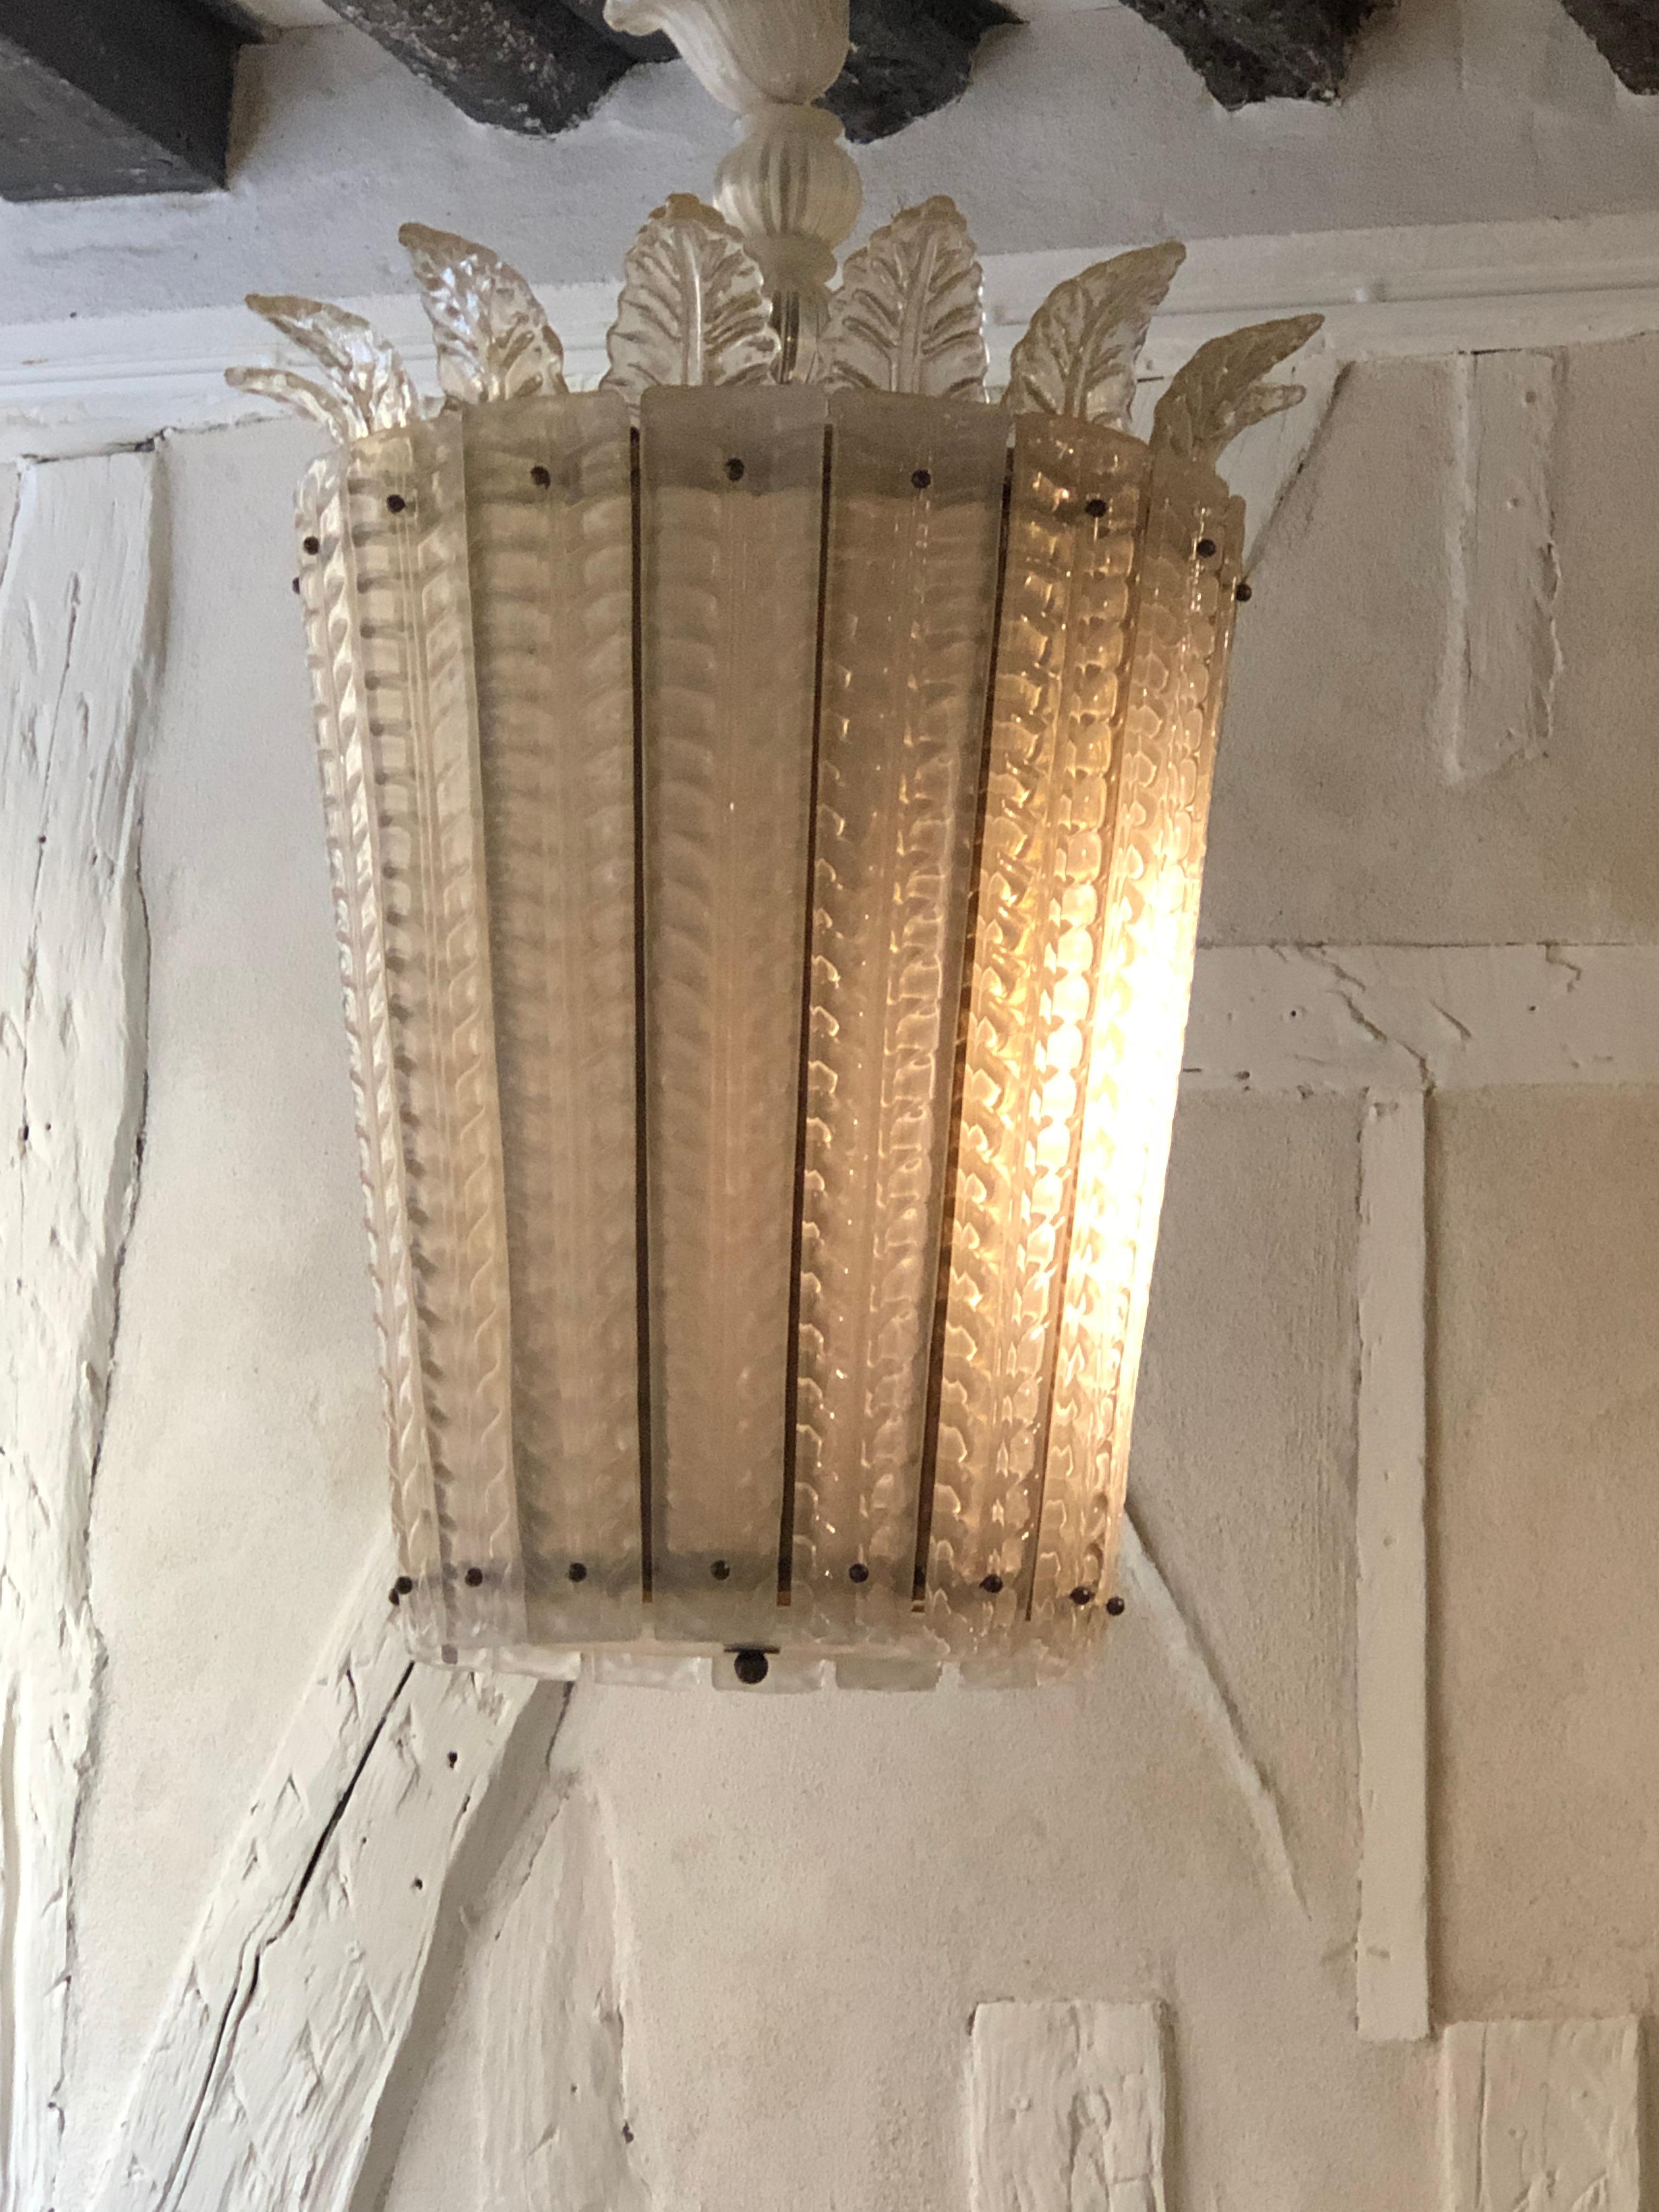 Absolutely gorgeous contemporary large lantern made with original vintage Murano glass from the 1950s. The lattimo (translucent milk glass) white / with gold inclusion carved plaque in the shape of braid (like stylized palm leaves) and a crown of